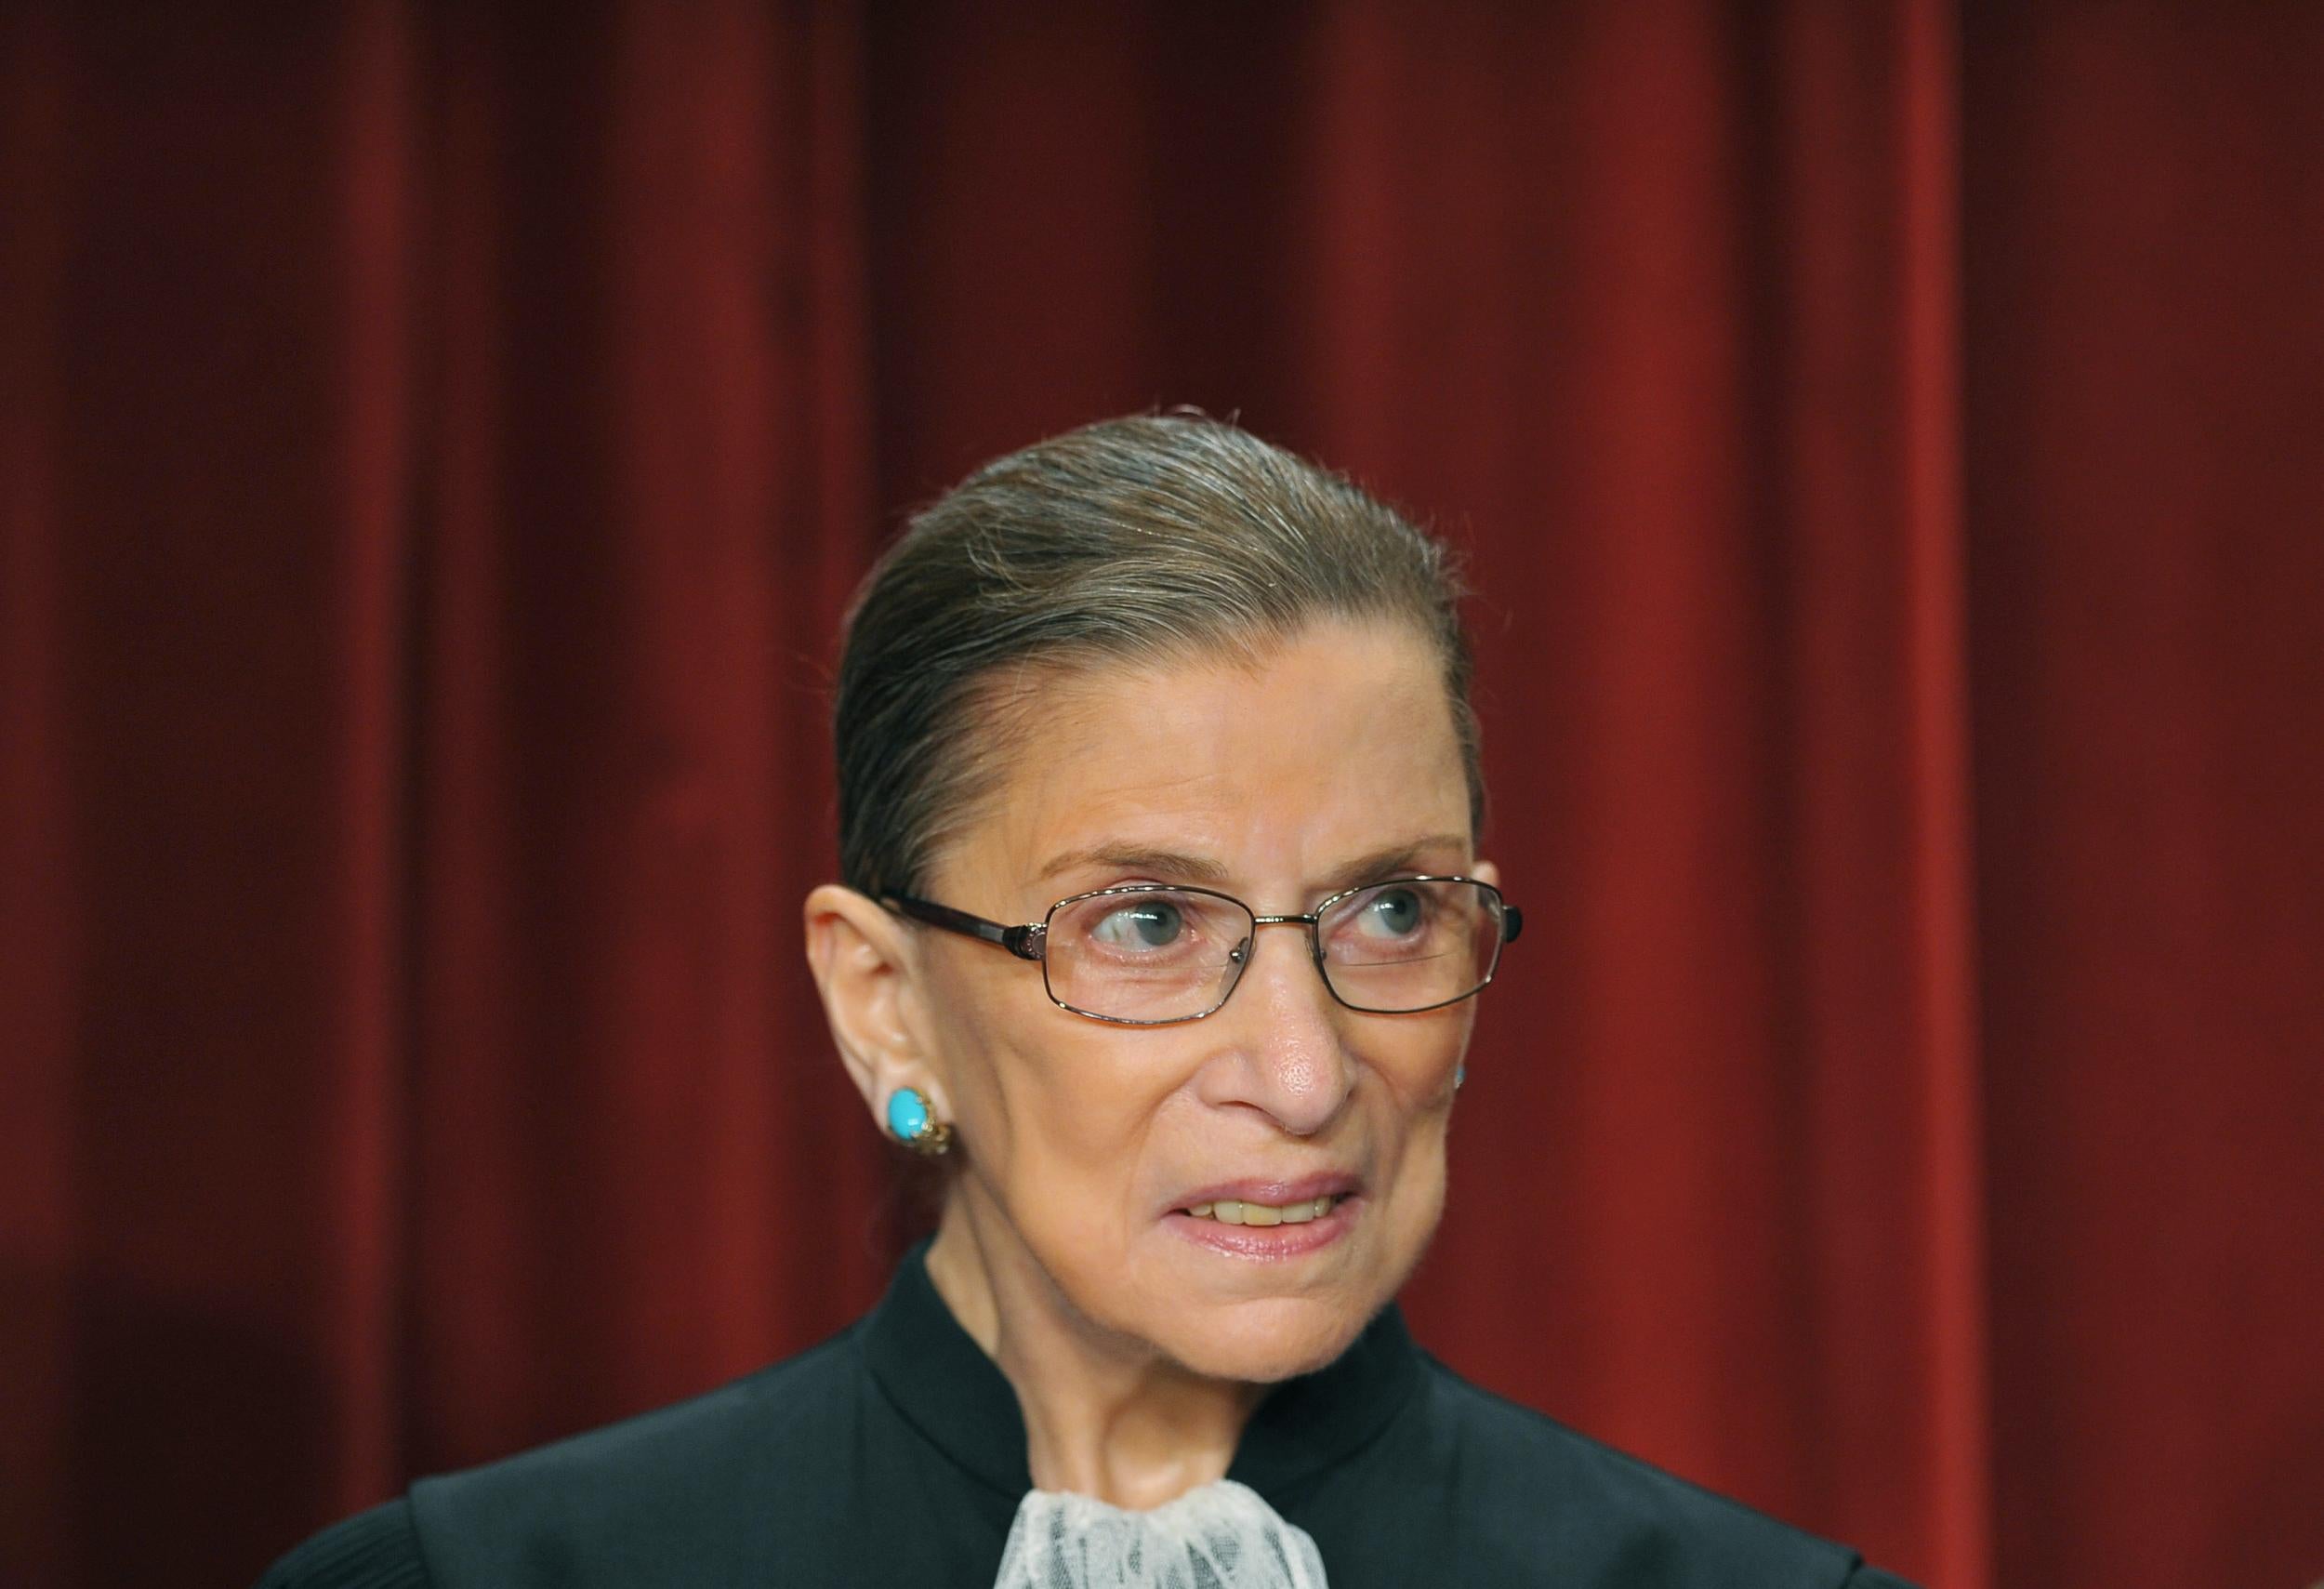 Trump News Live: Latest election update as the death of the RBG will unleash the Supreme Court nomination battle